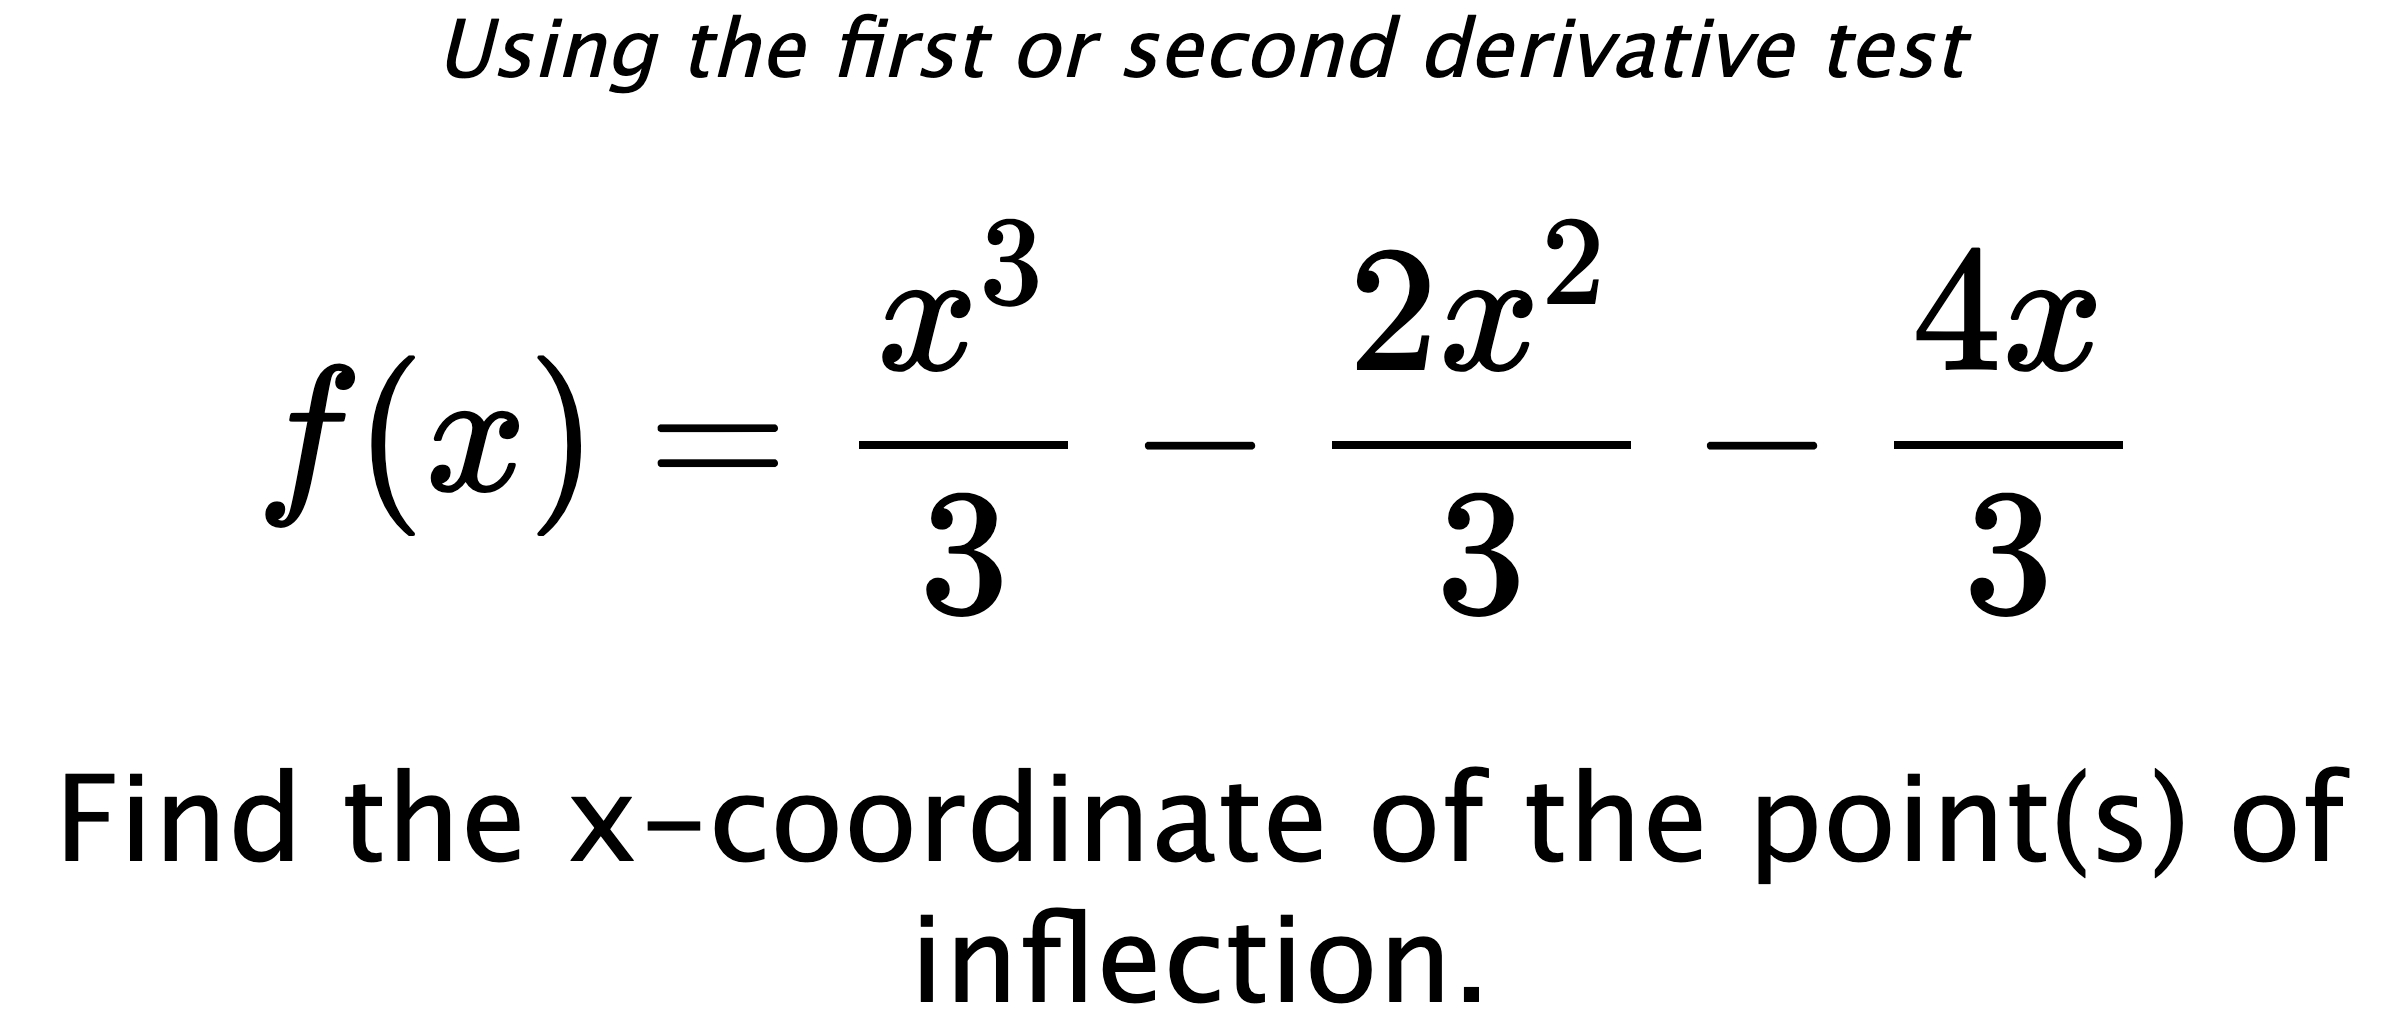 Using the first or second derivative test $$ f(x)=\frac{x^3}{3}-\frac{2x^2}{3}-\frac{4x}{3} $$ Find the x-coordinate of the point(s) of inflection.